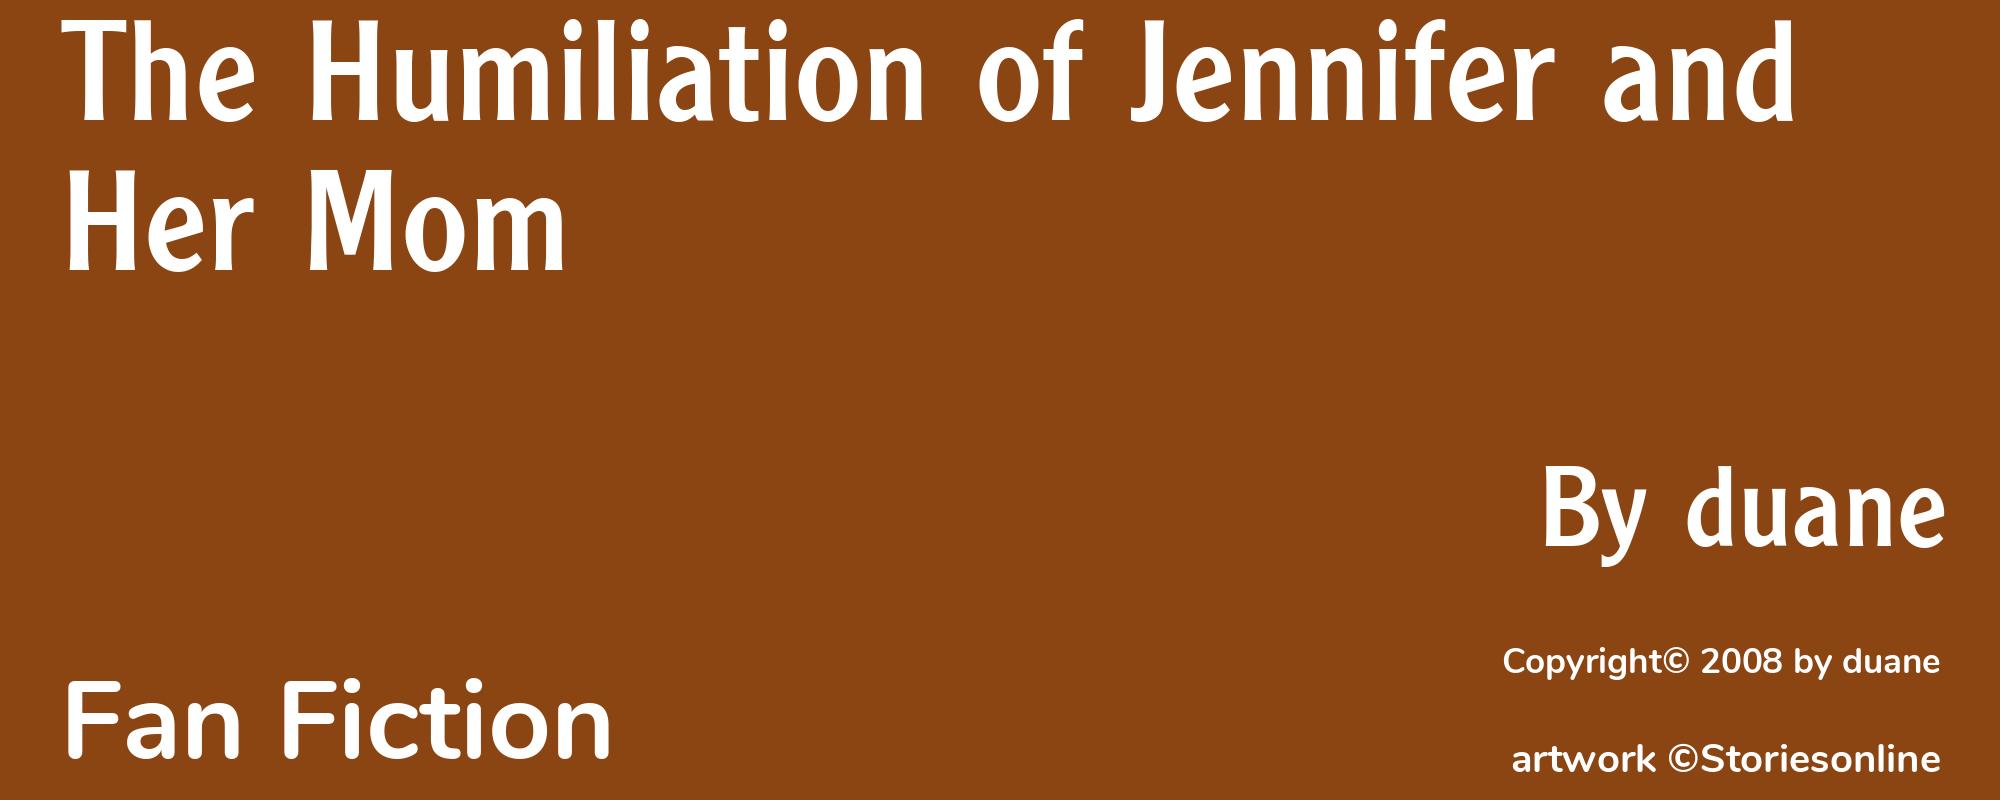 The Humiliation of Jennifer and Her Mom - Cover